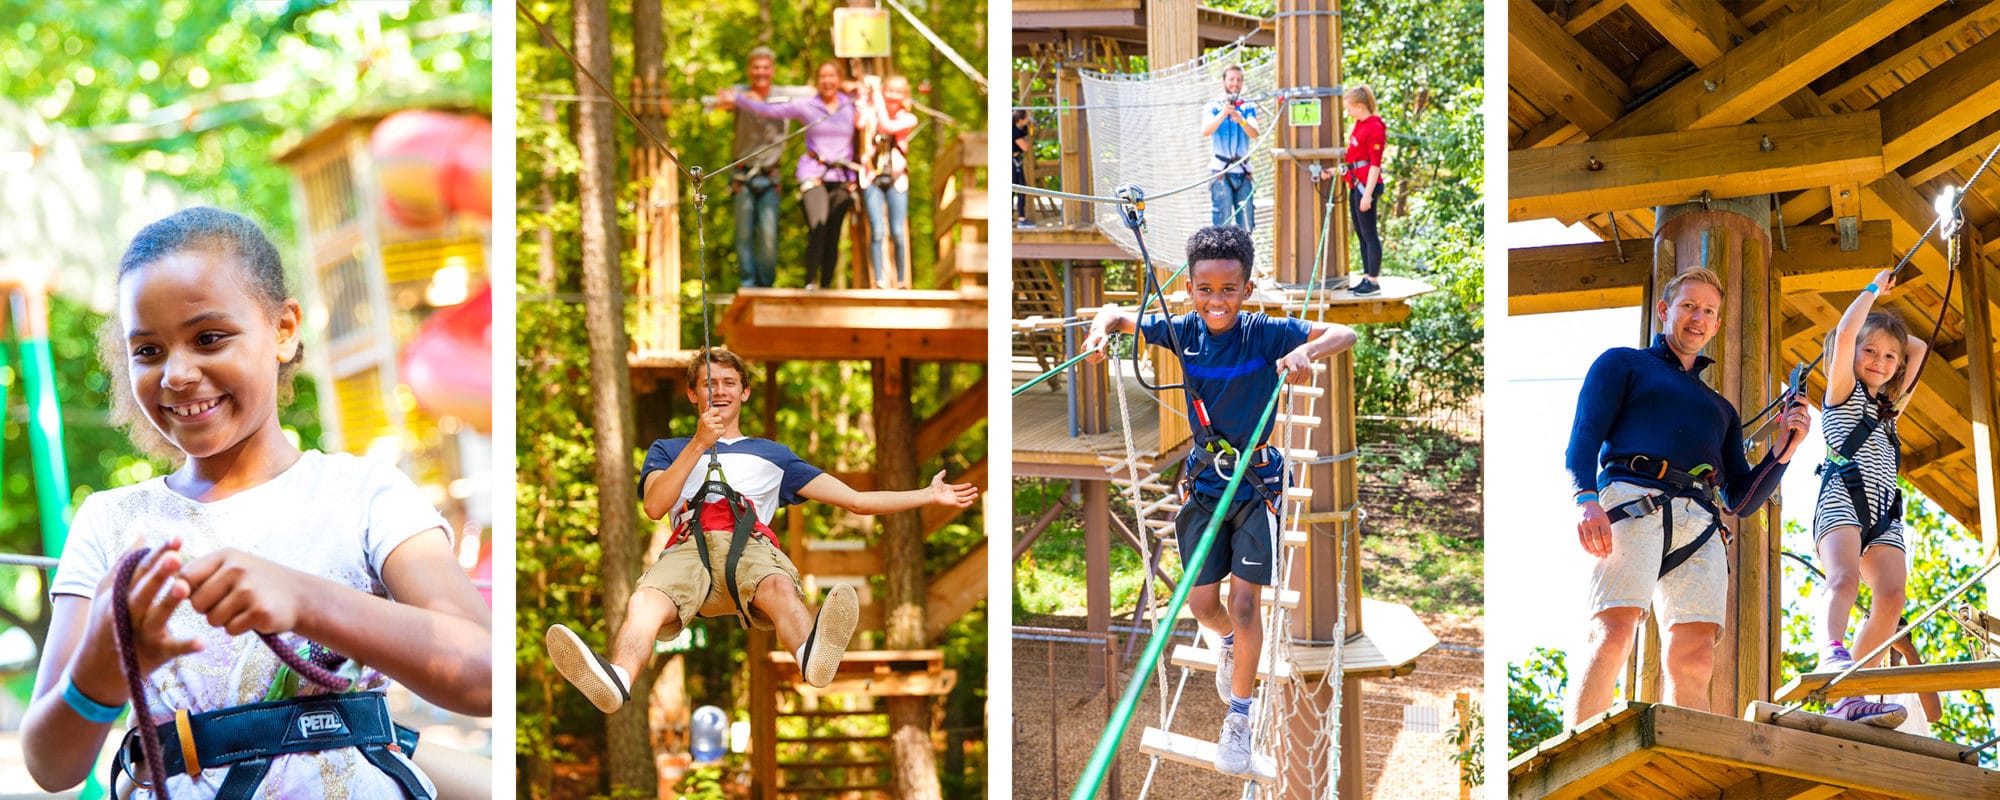 Go Ape Our Adventures Learn About Treetop Journeys